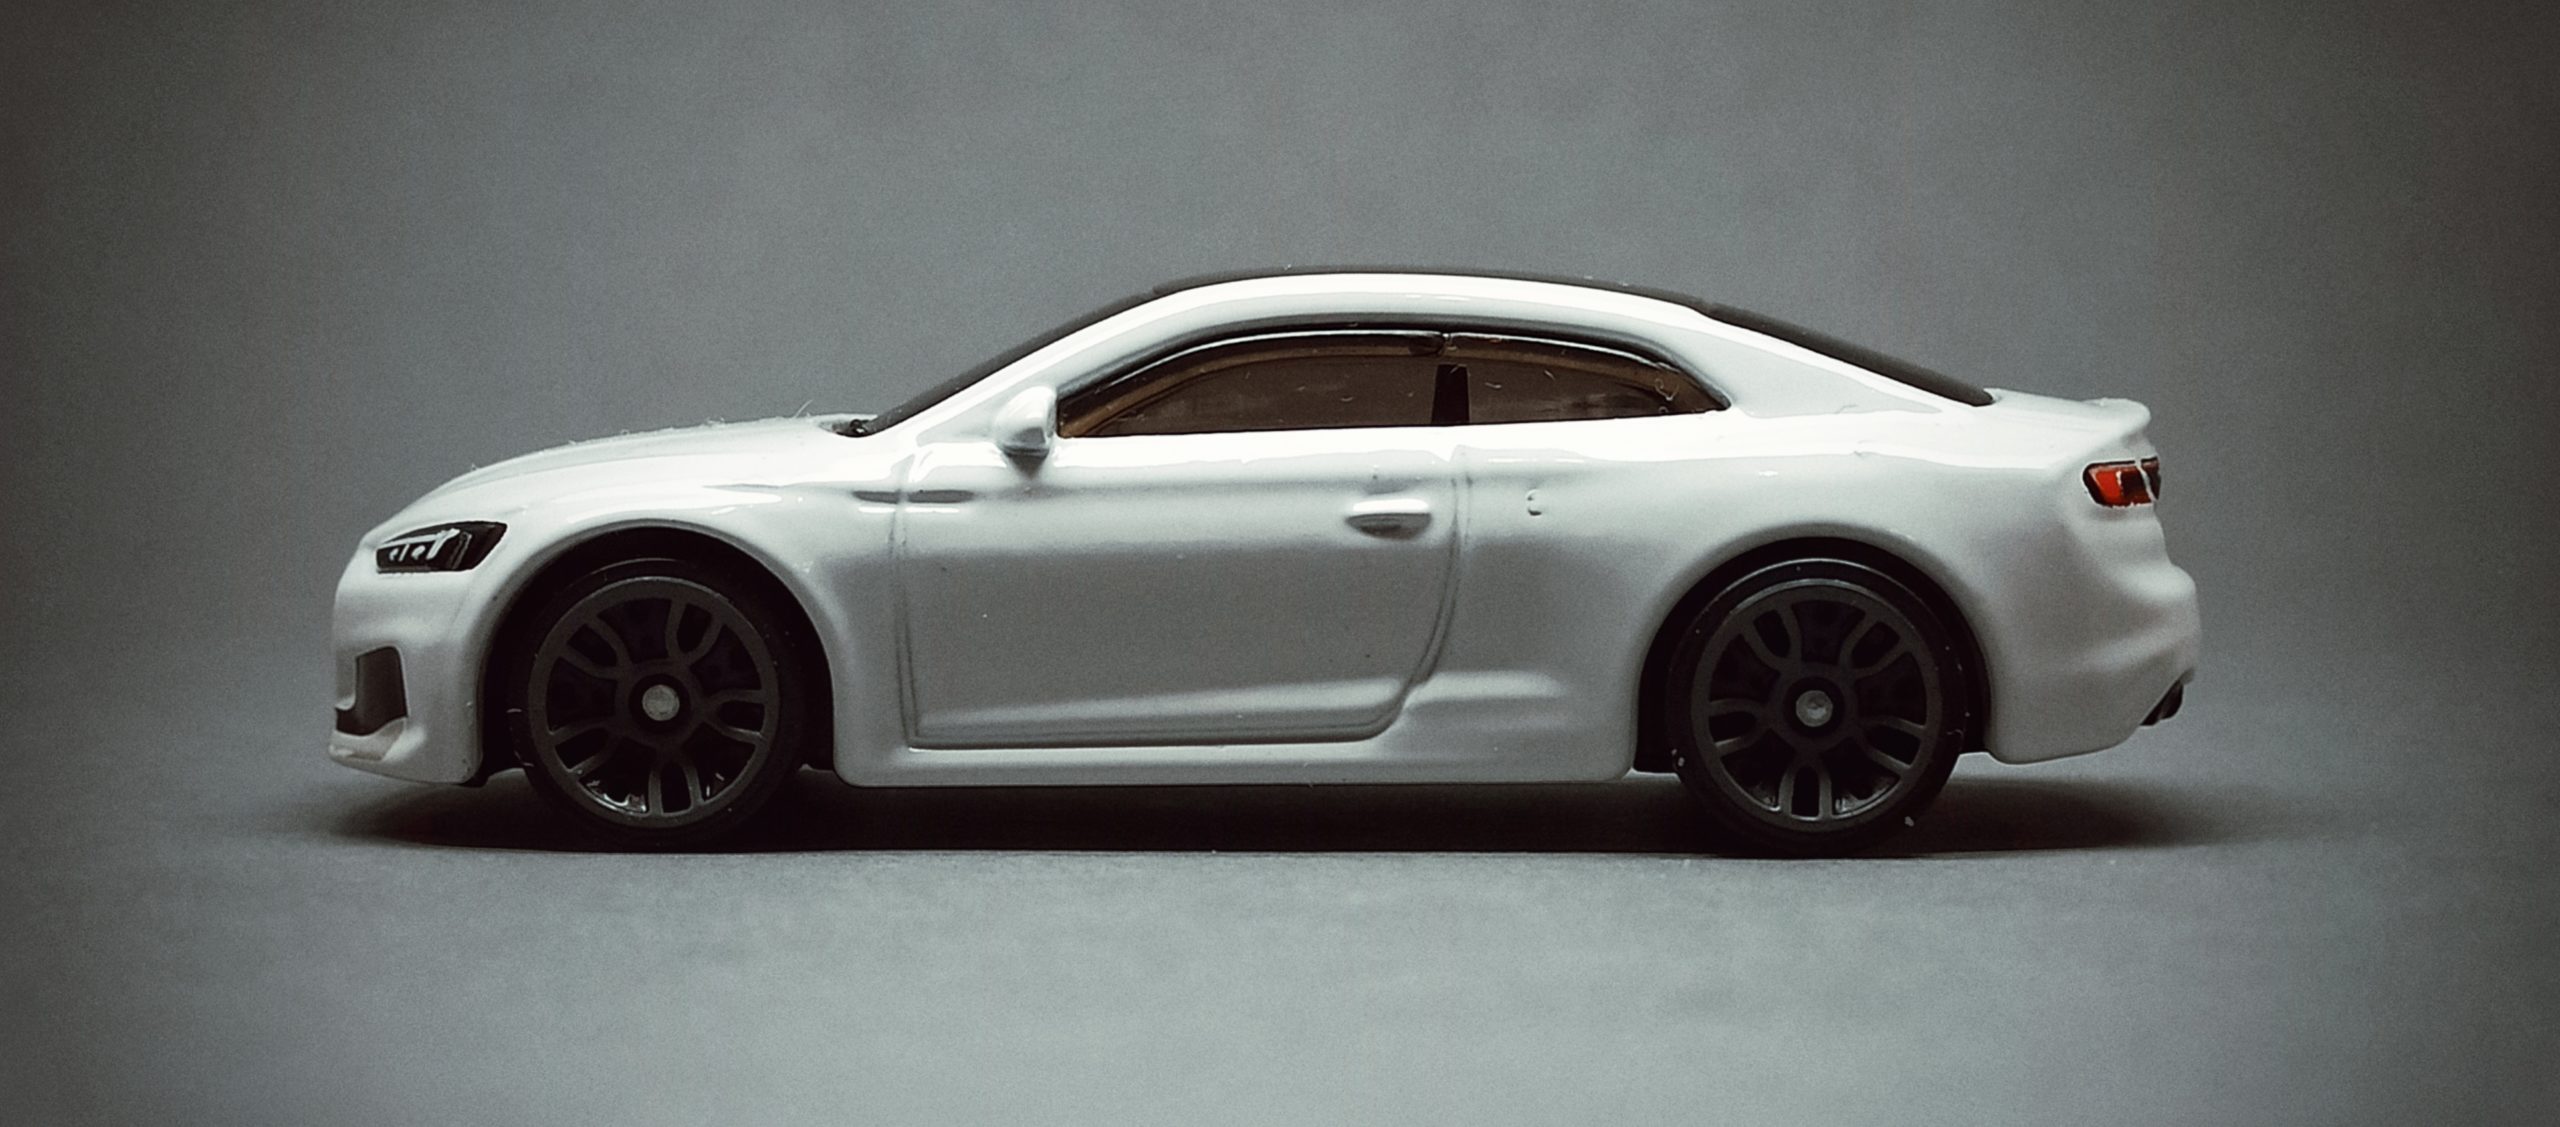 Hot Wheels Audi RS 5 Coupé (X6999) 2021 Multipack Exclusive white